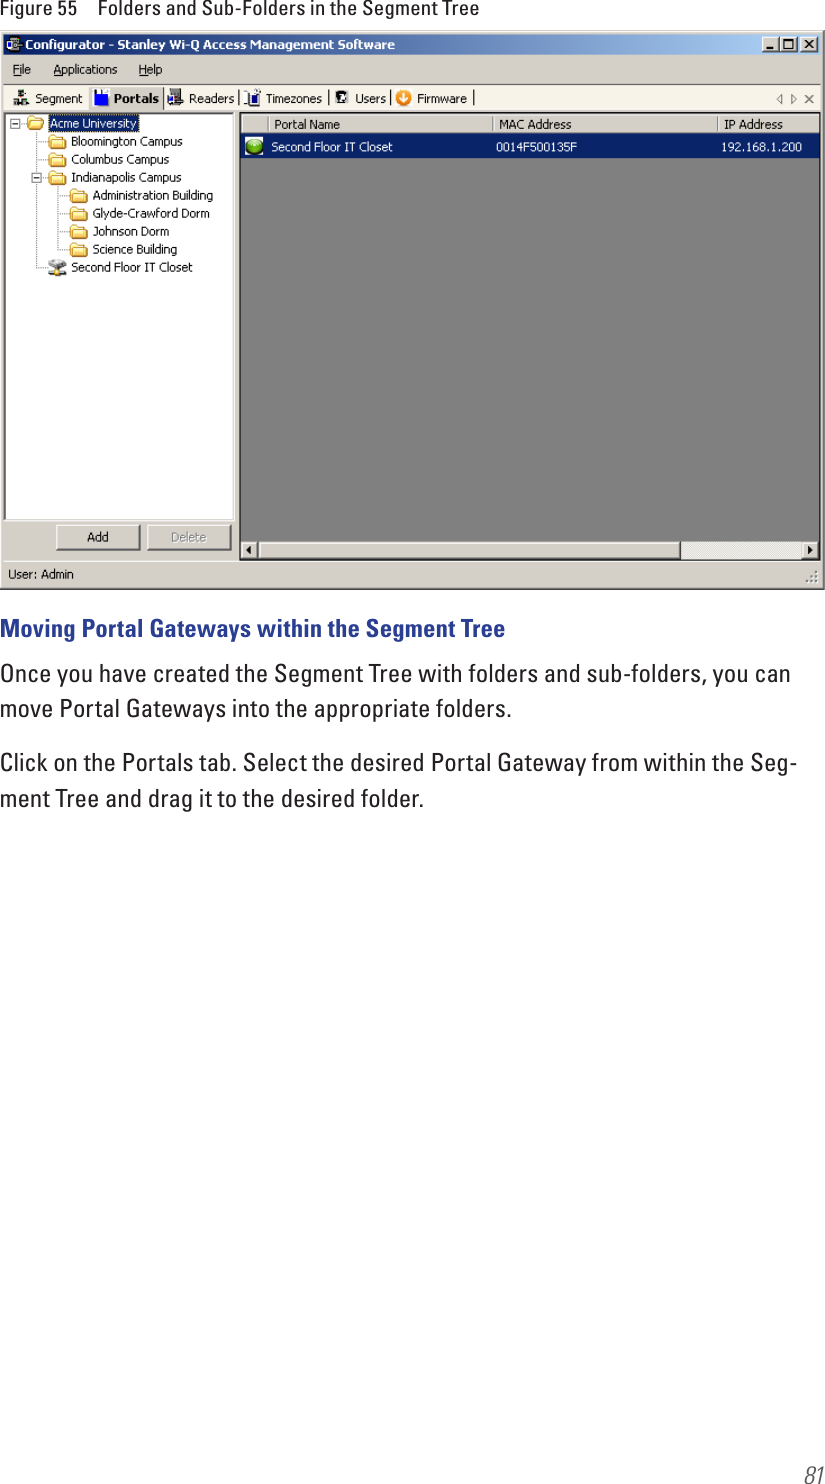 81Figure 55  Folders and Sub-Folders in the Segment TreeMoving Portal Gateways within the Segment TreeOnce you have created the Segment Tree with folders and sub-folders, you can move Portal Gateways into the appropriate folders.Click on the Portals tab. Select the desired Portal Gateway from within the Seg-ment Tree and drag it to the desired folder. 